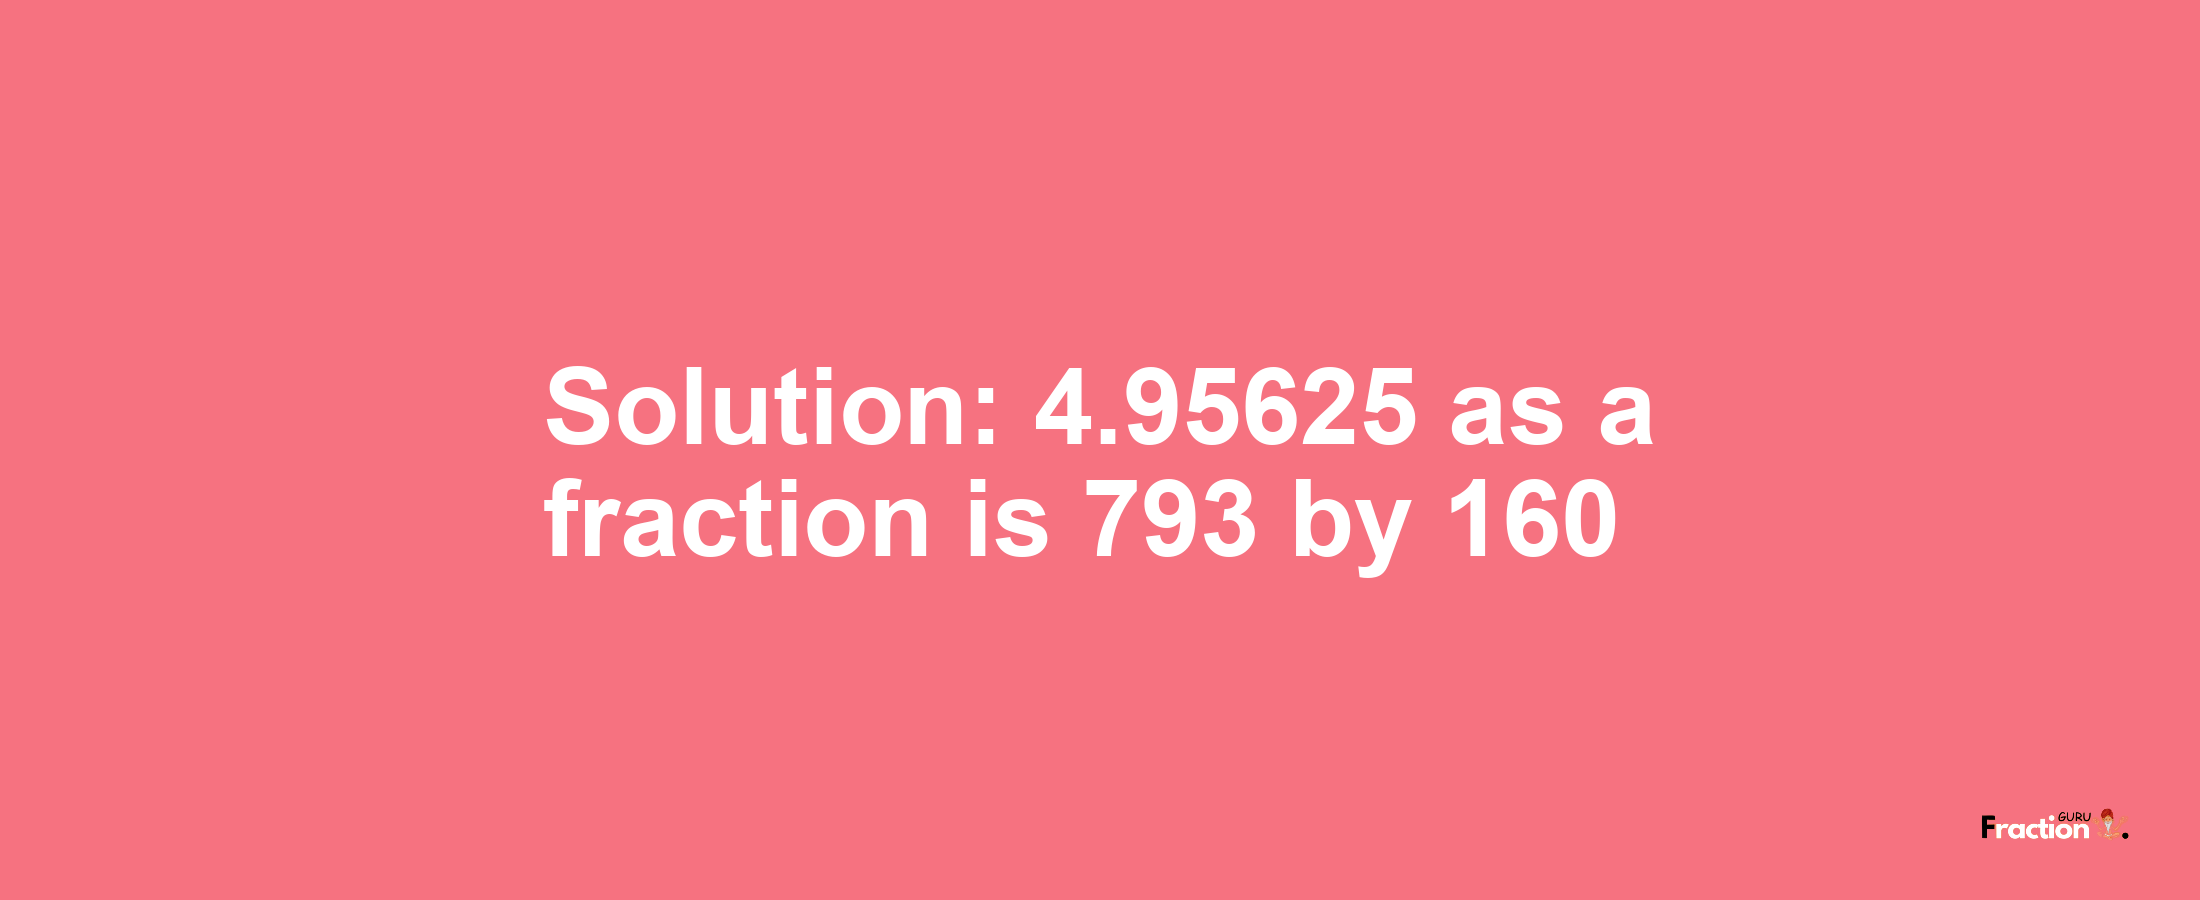 Solution:4.95625 as a fraction is 793/160